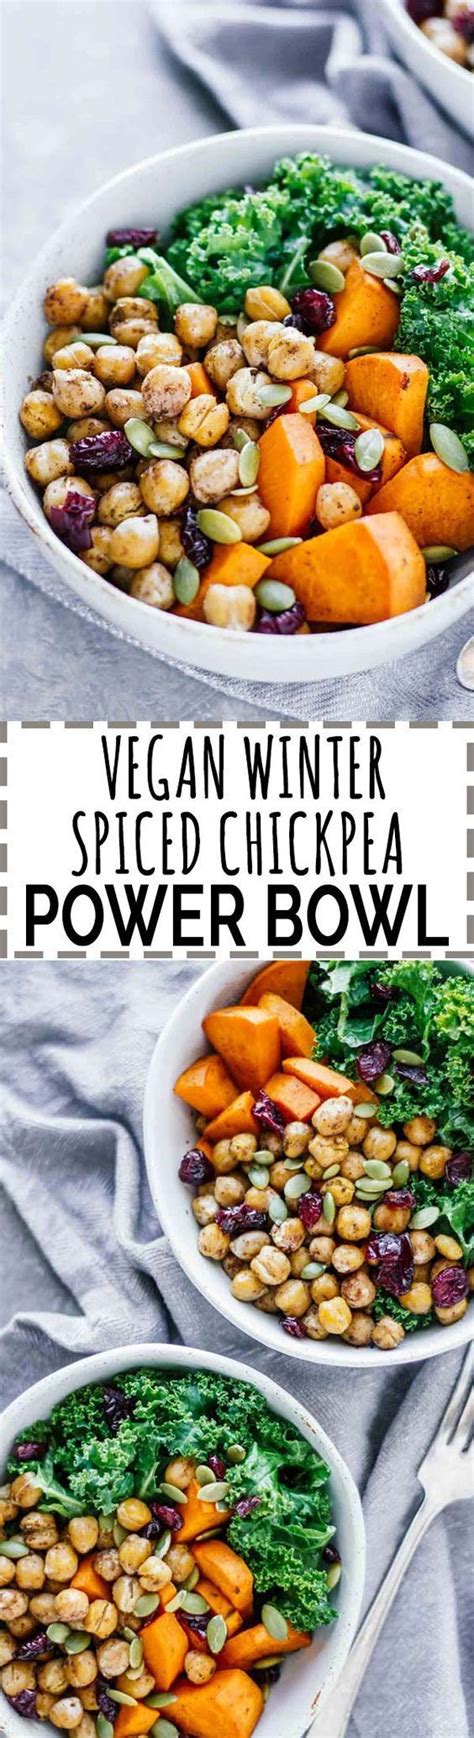 Vegan Winter Spiced Chickpea Power Bowl Recipe With